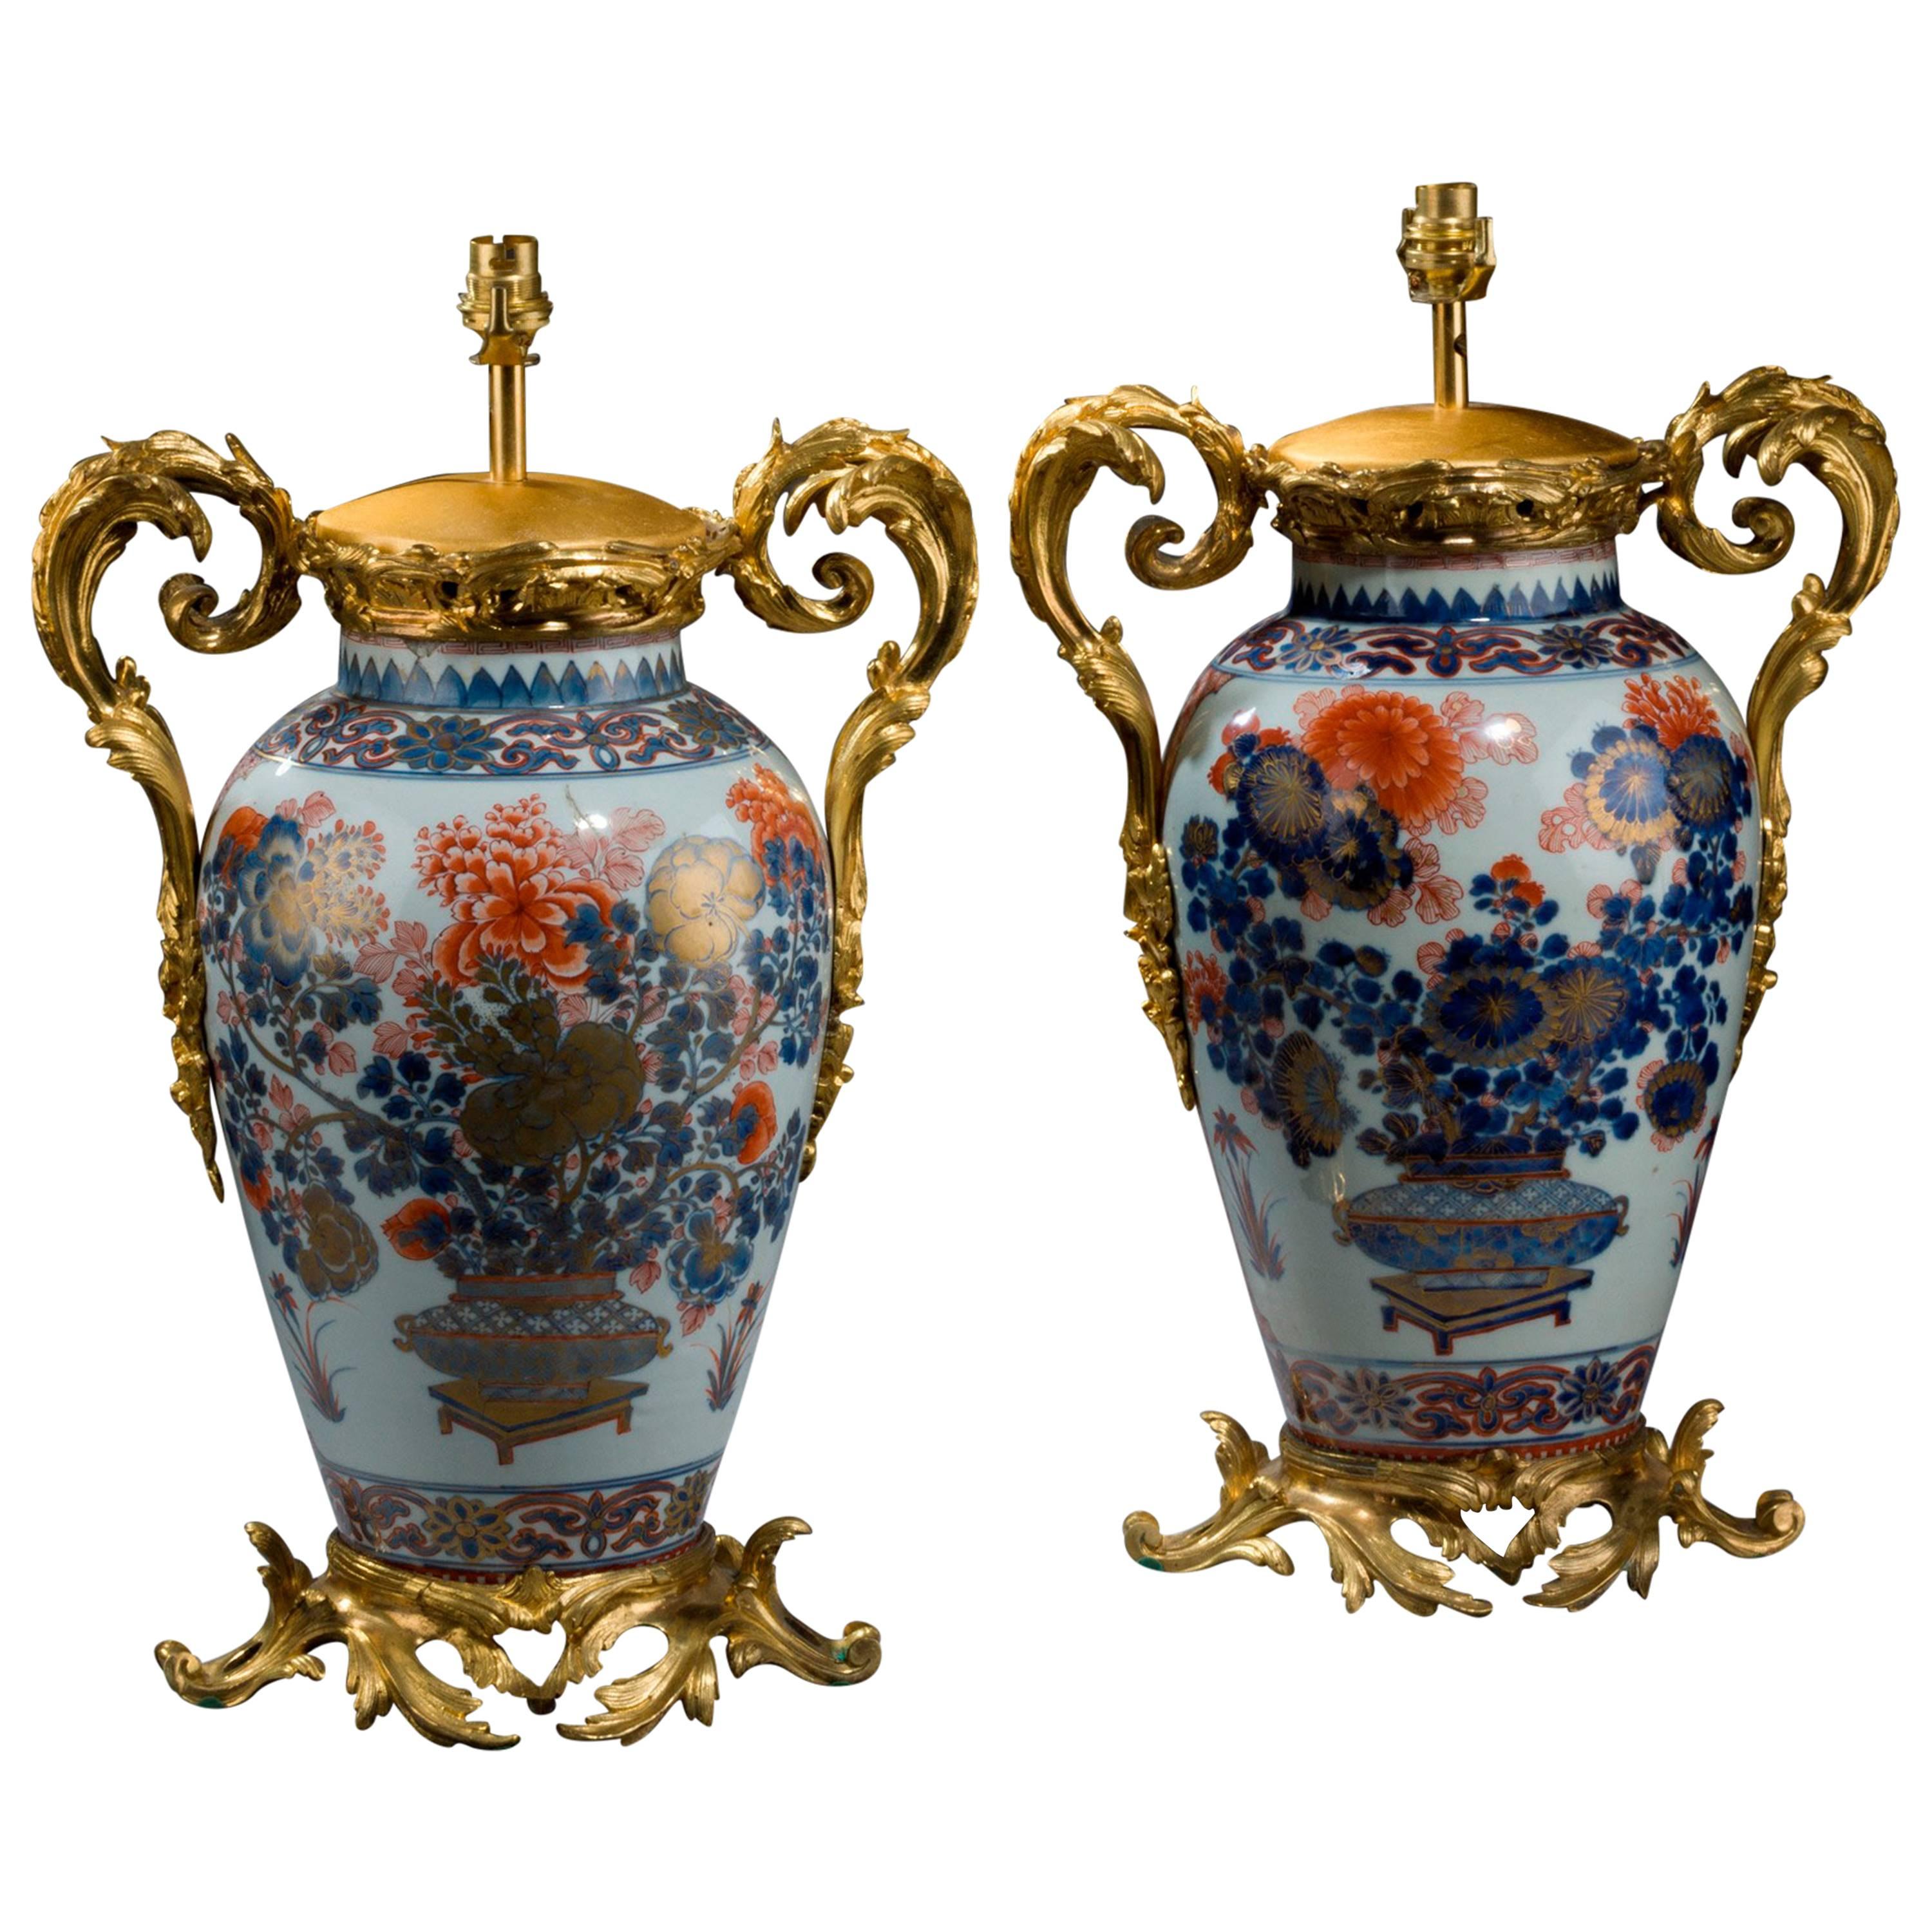 Pair of late 19th century Oriental Porcelain Ovoid Vase Lamps